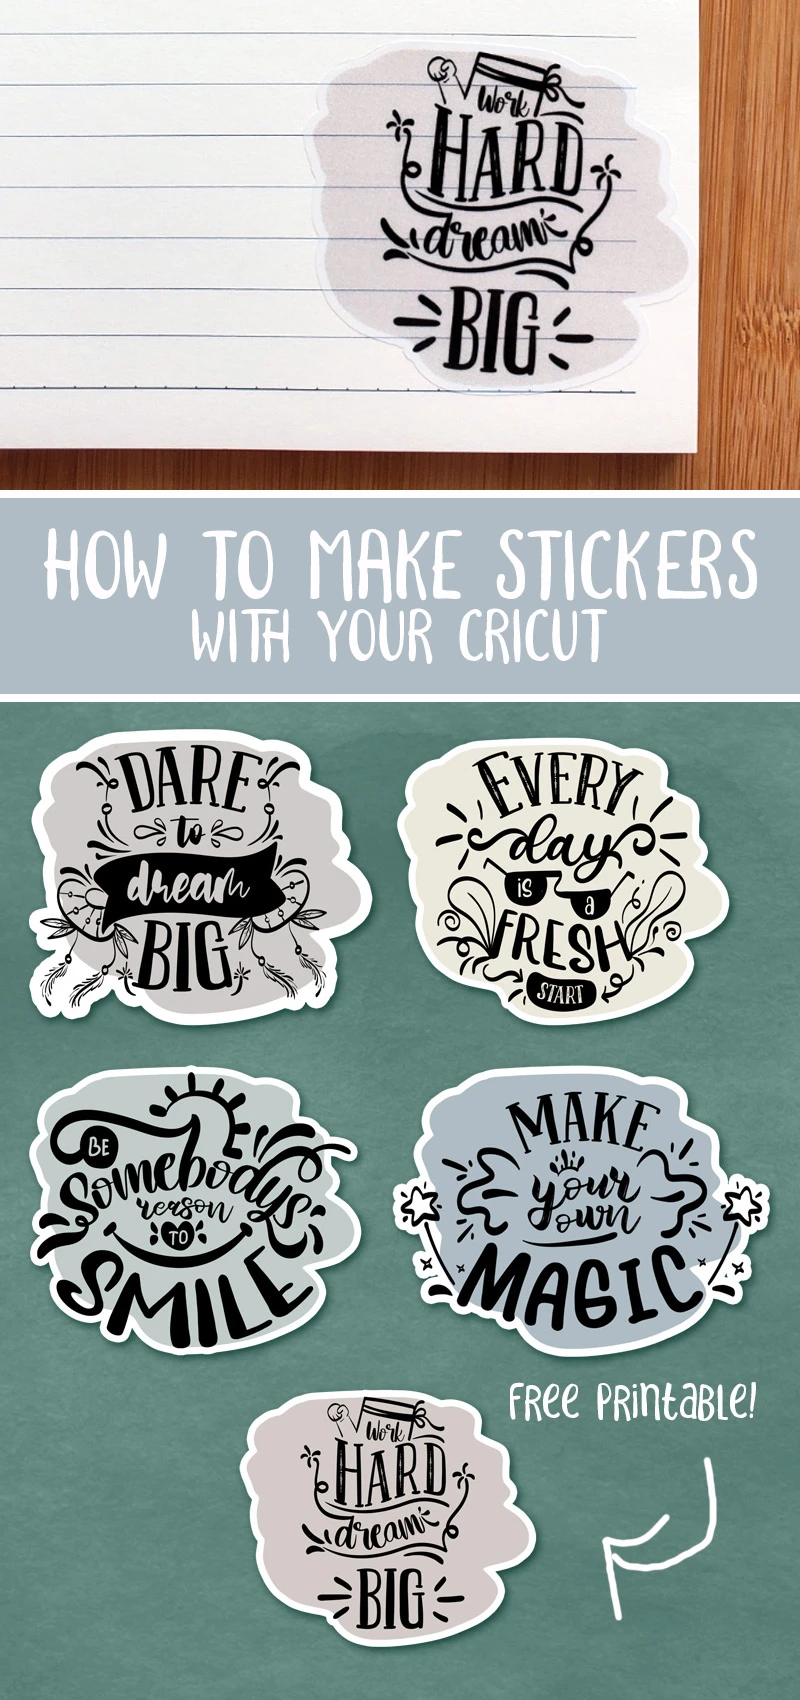 Learn how to make stickers with your cricut - collage with title